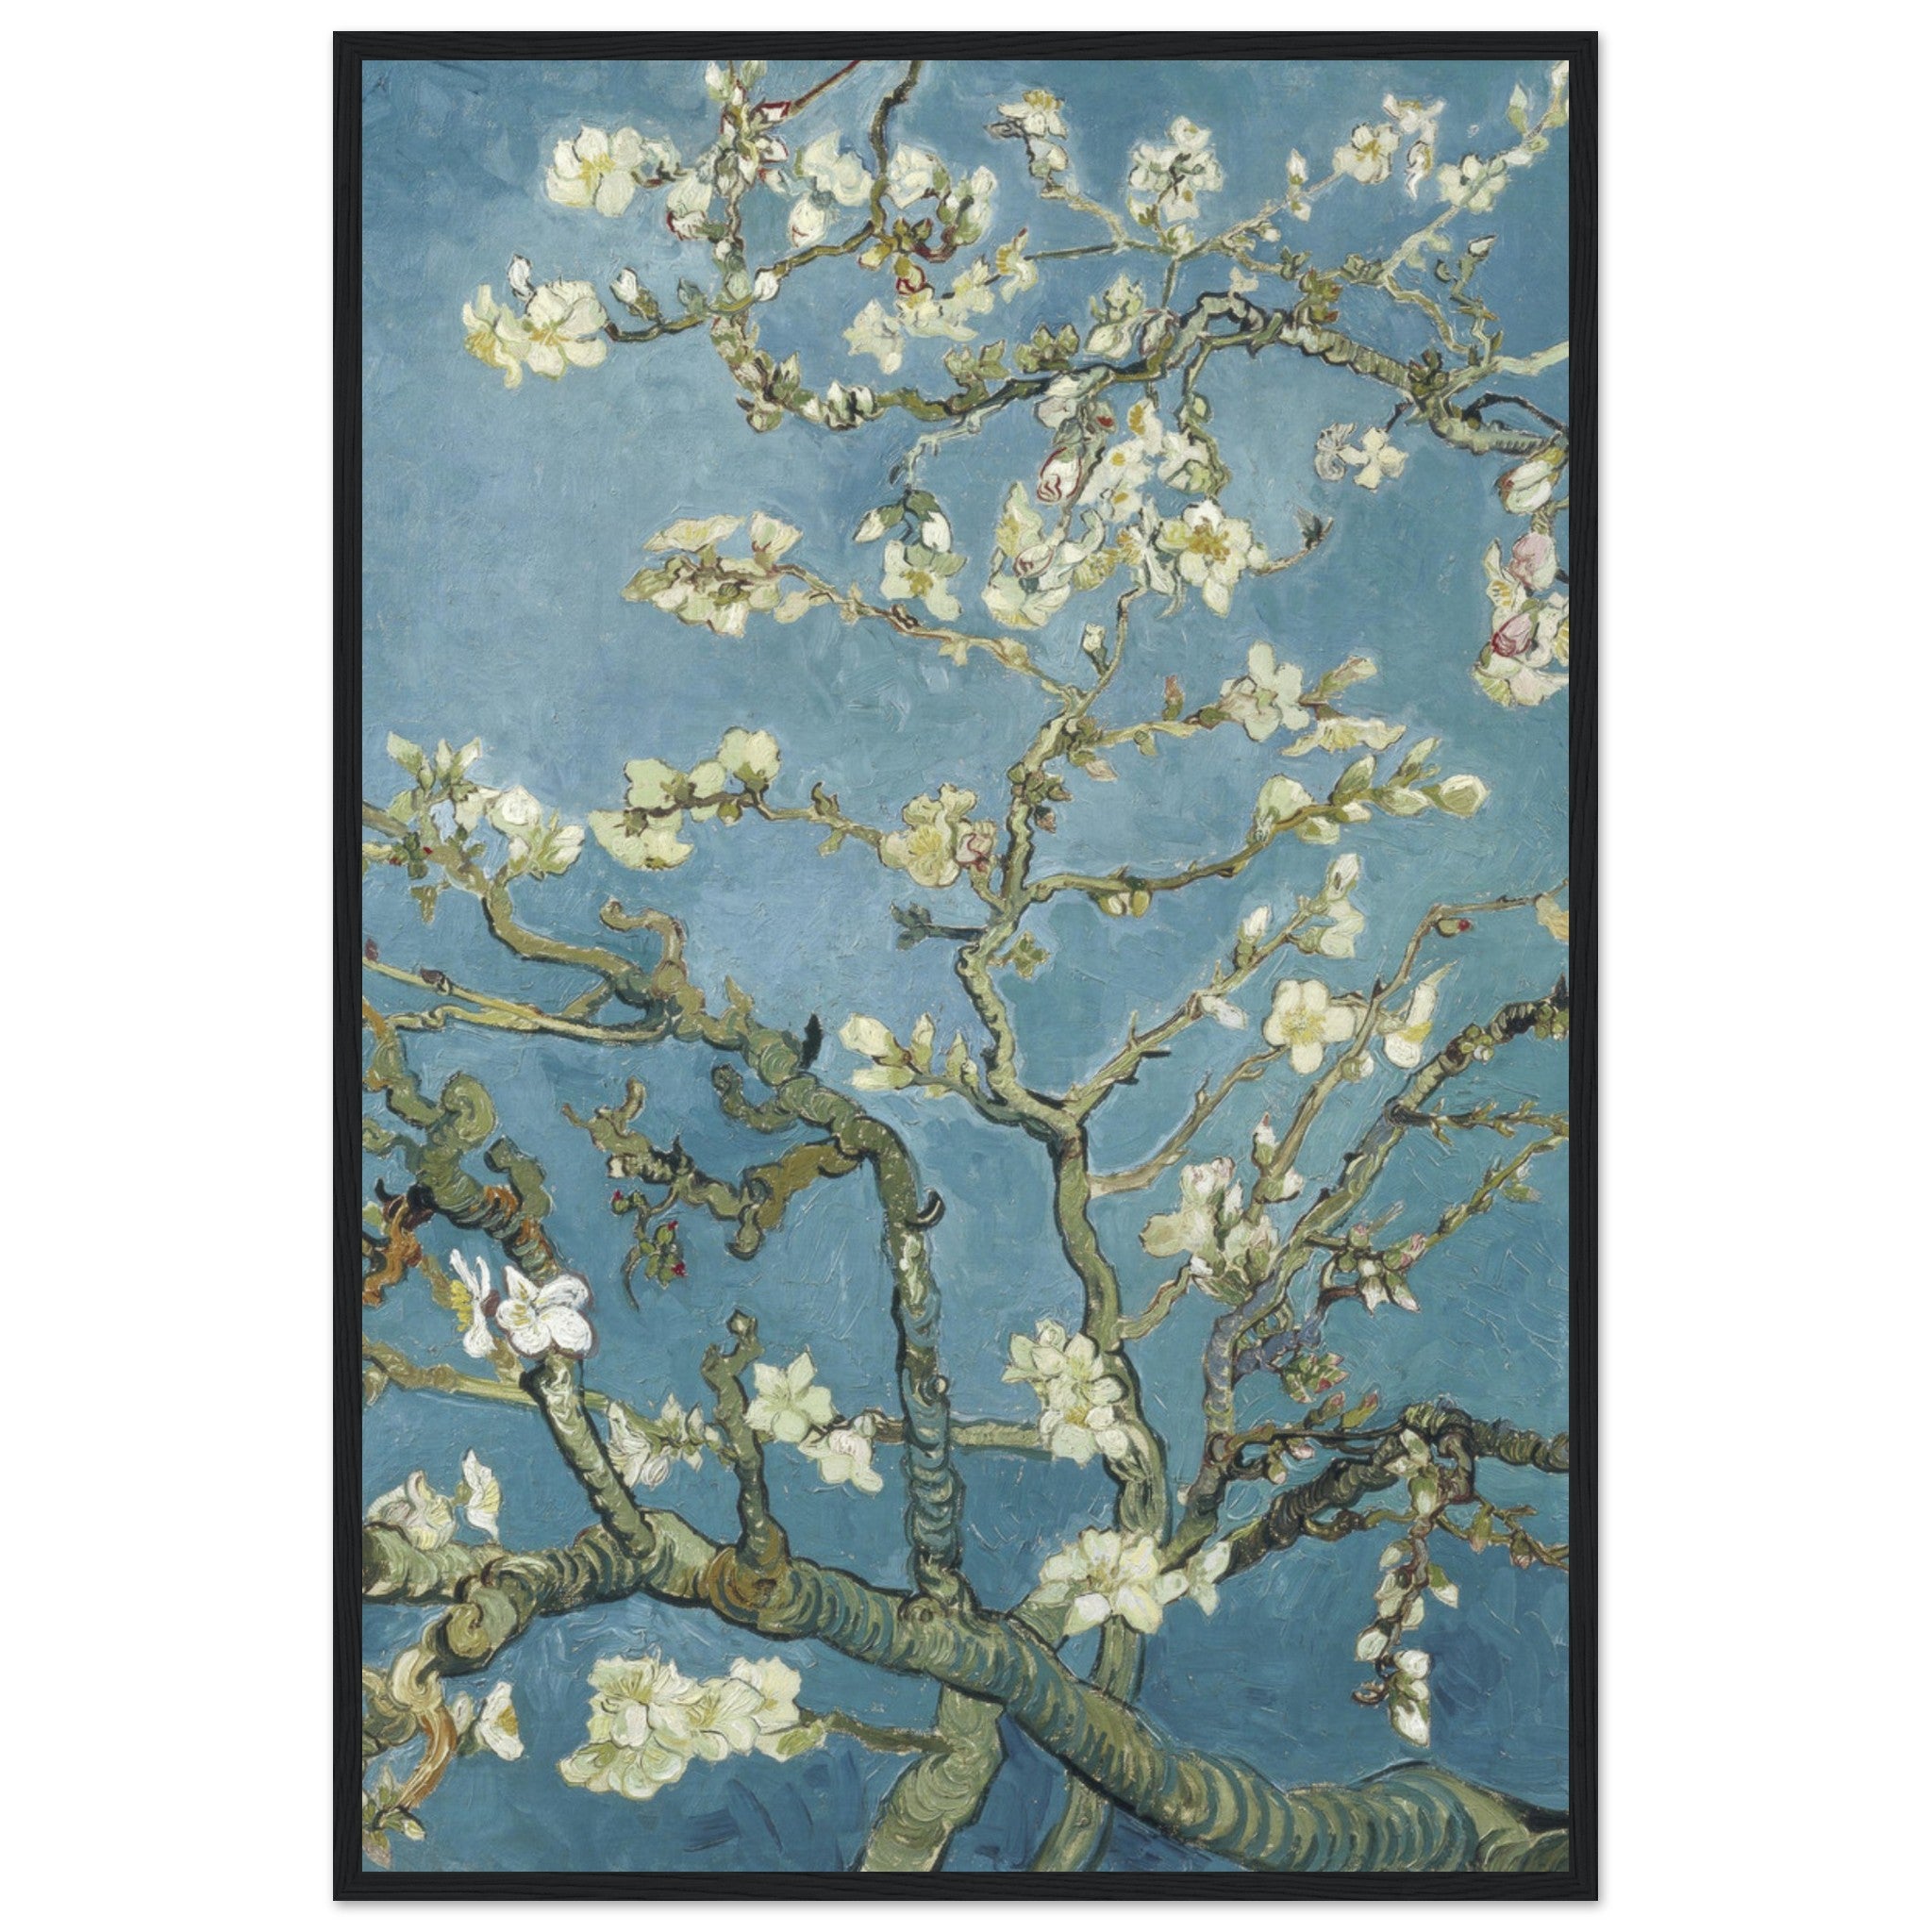 Almond blossom - By Vincent van Gogh